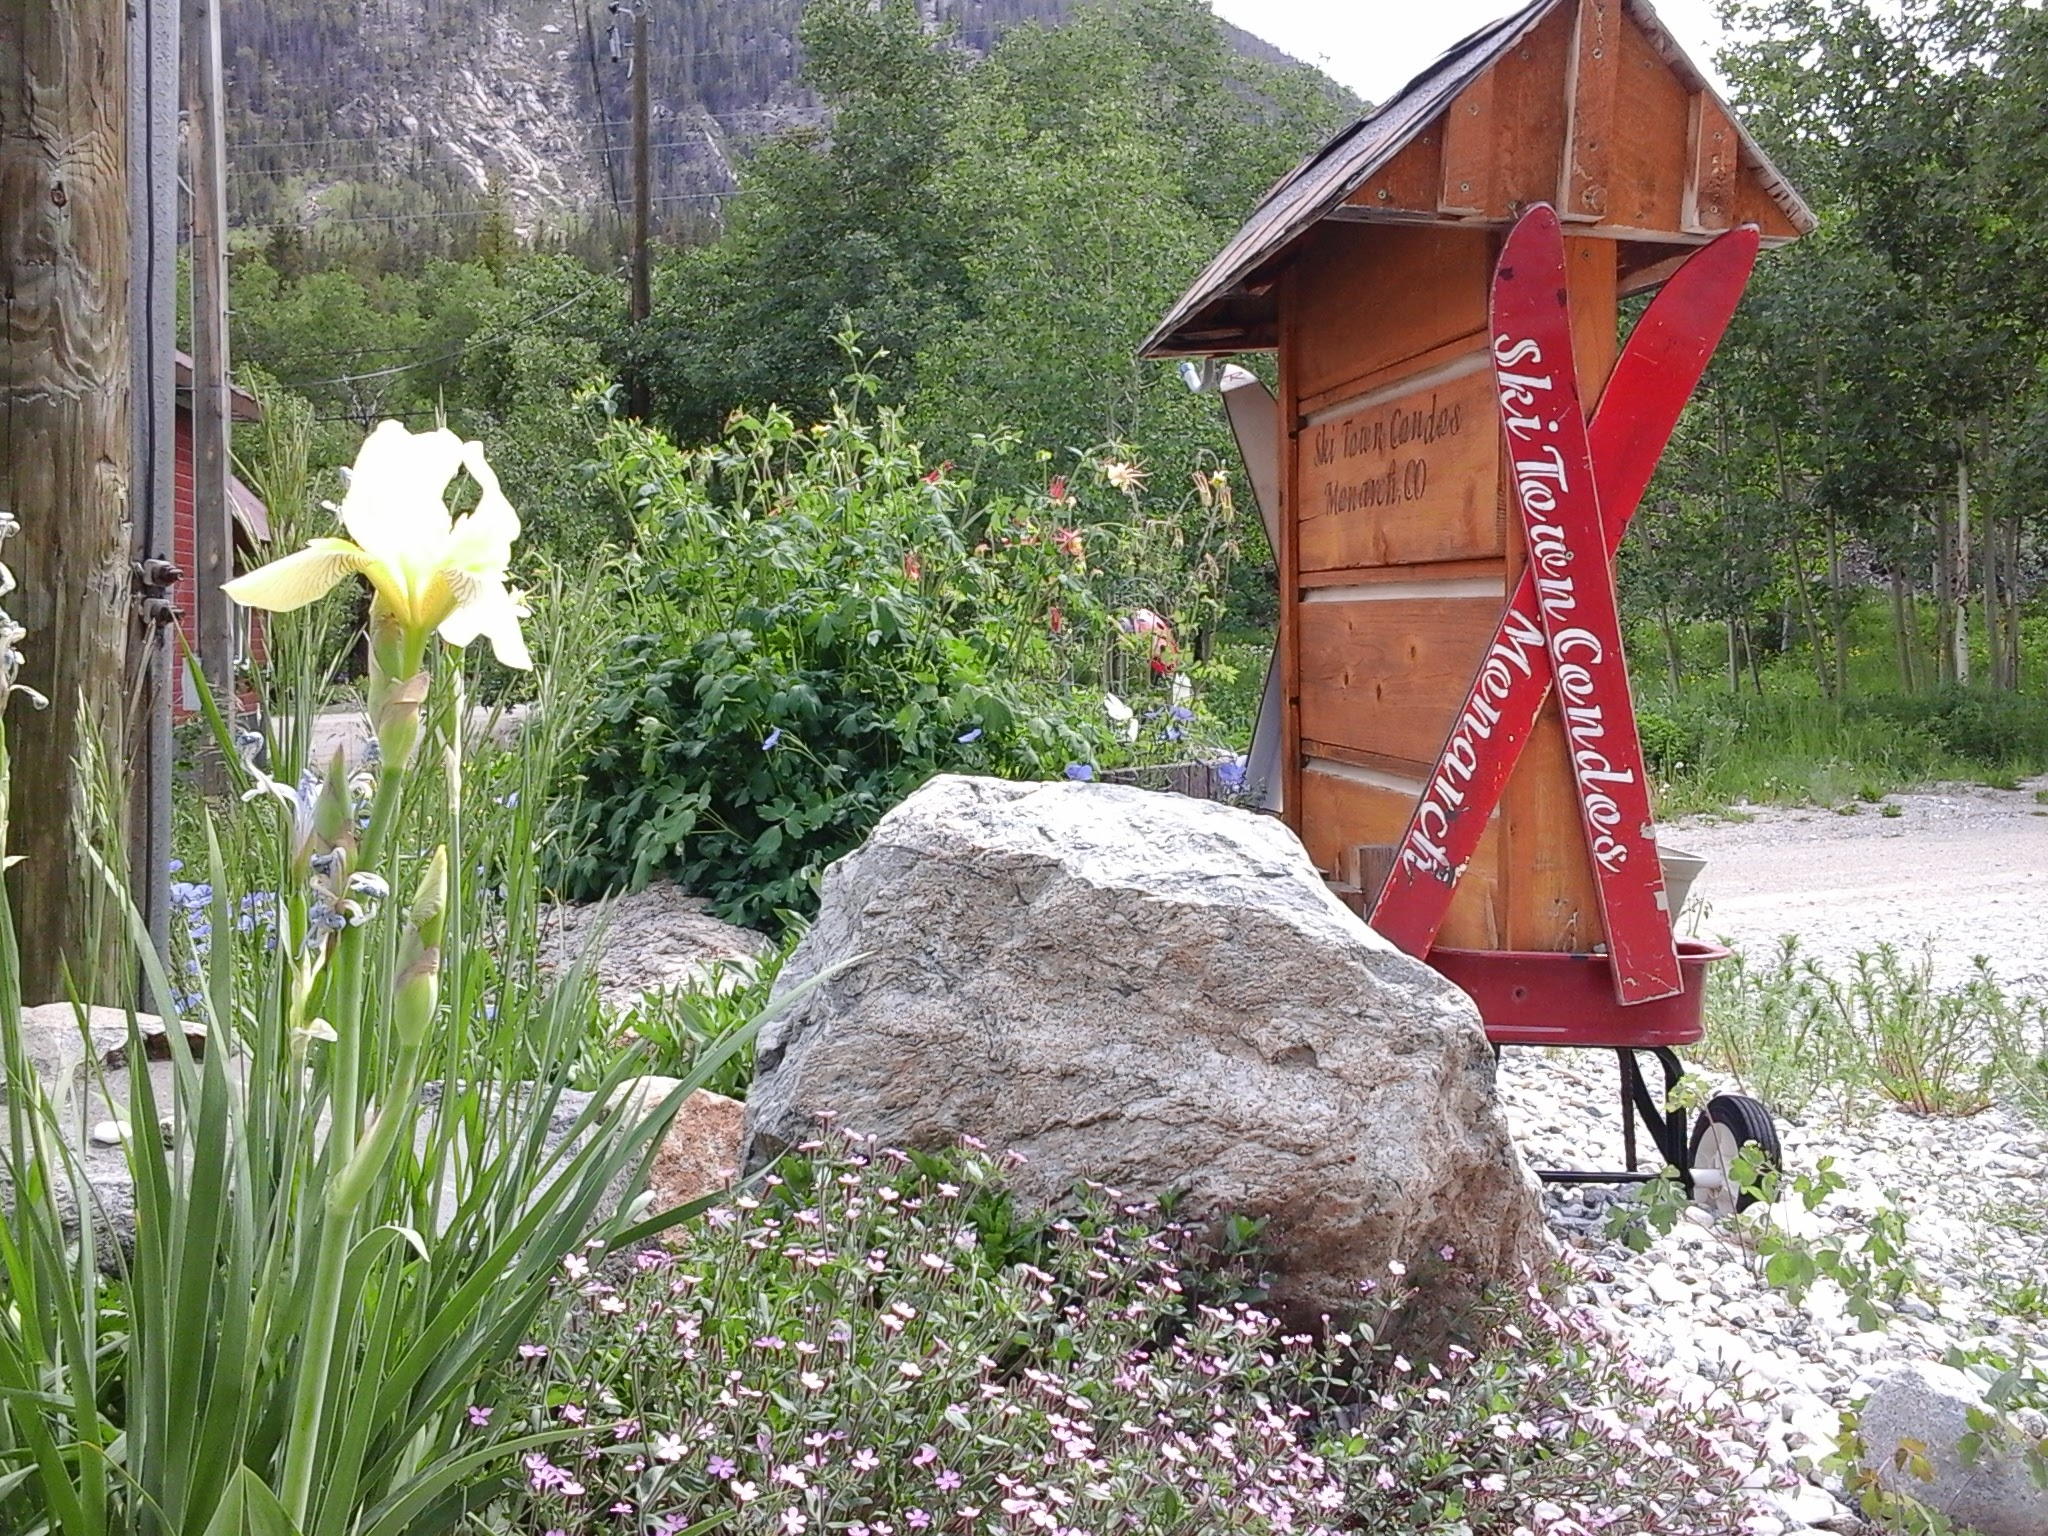 Exterior photo of flowers and wagon with crossed skis attached to Ski Town Condos sign.  Mountain in the background.